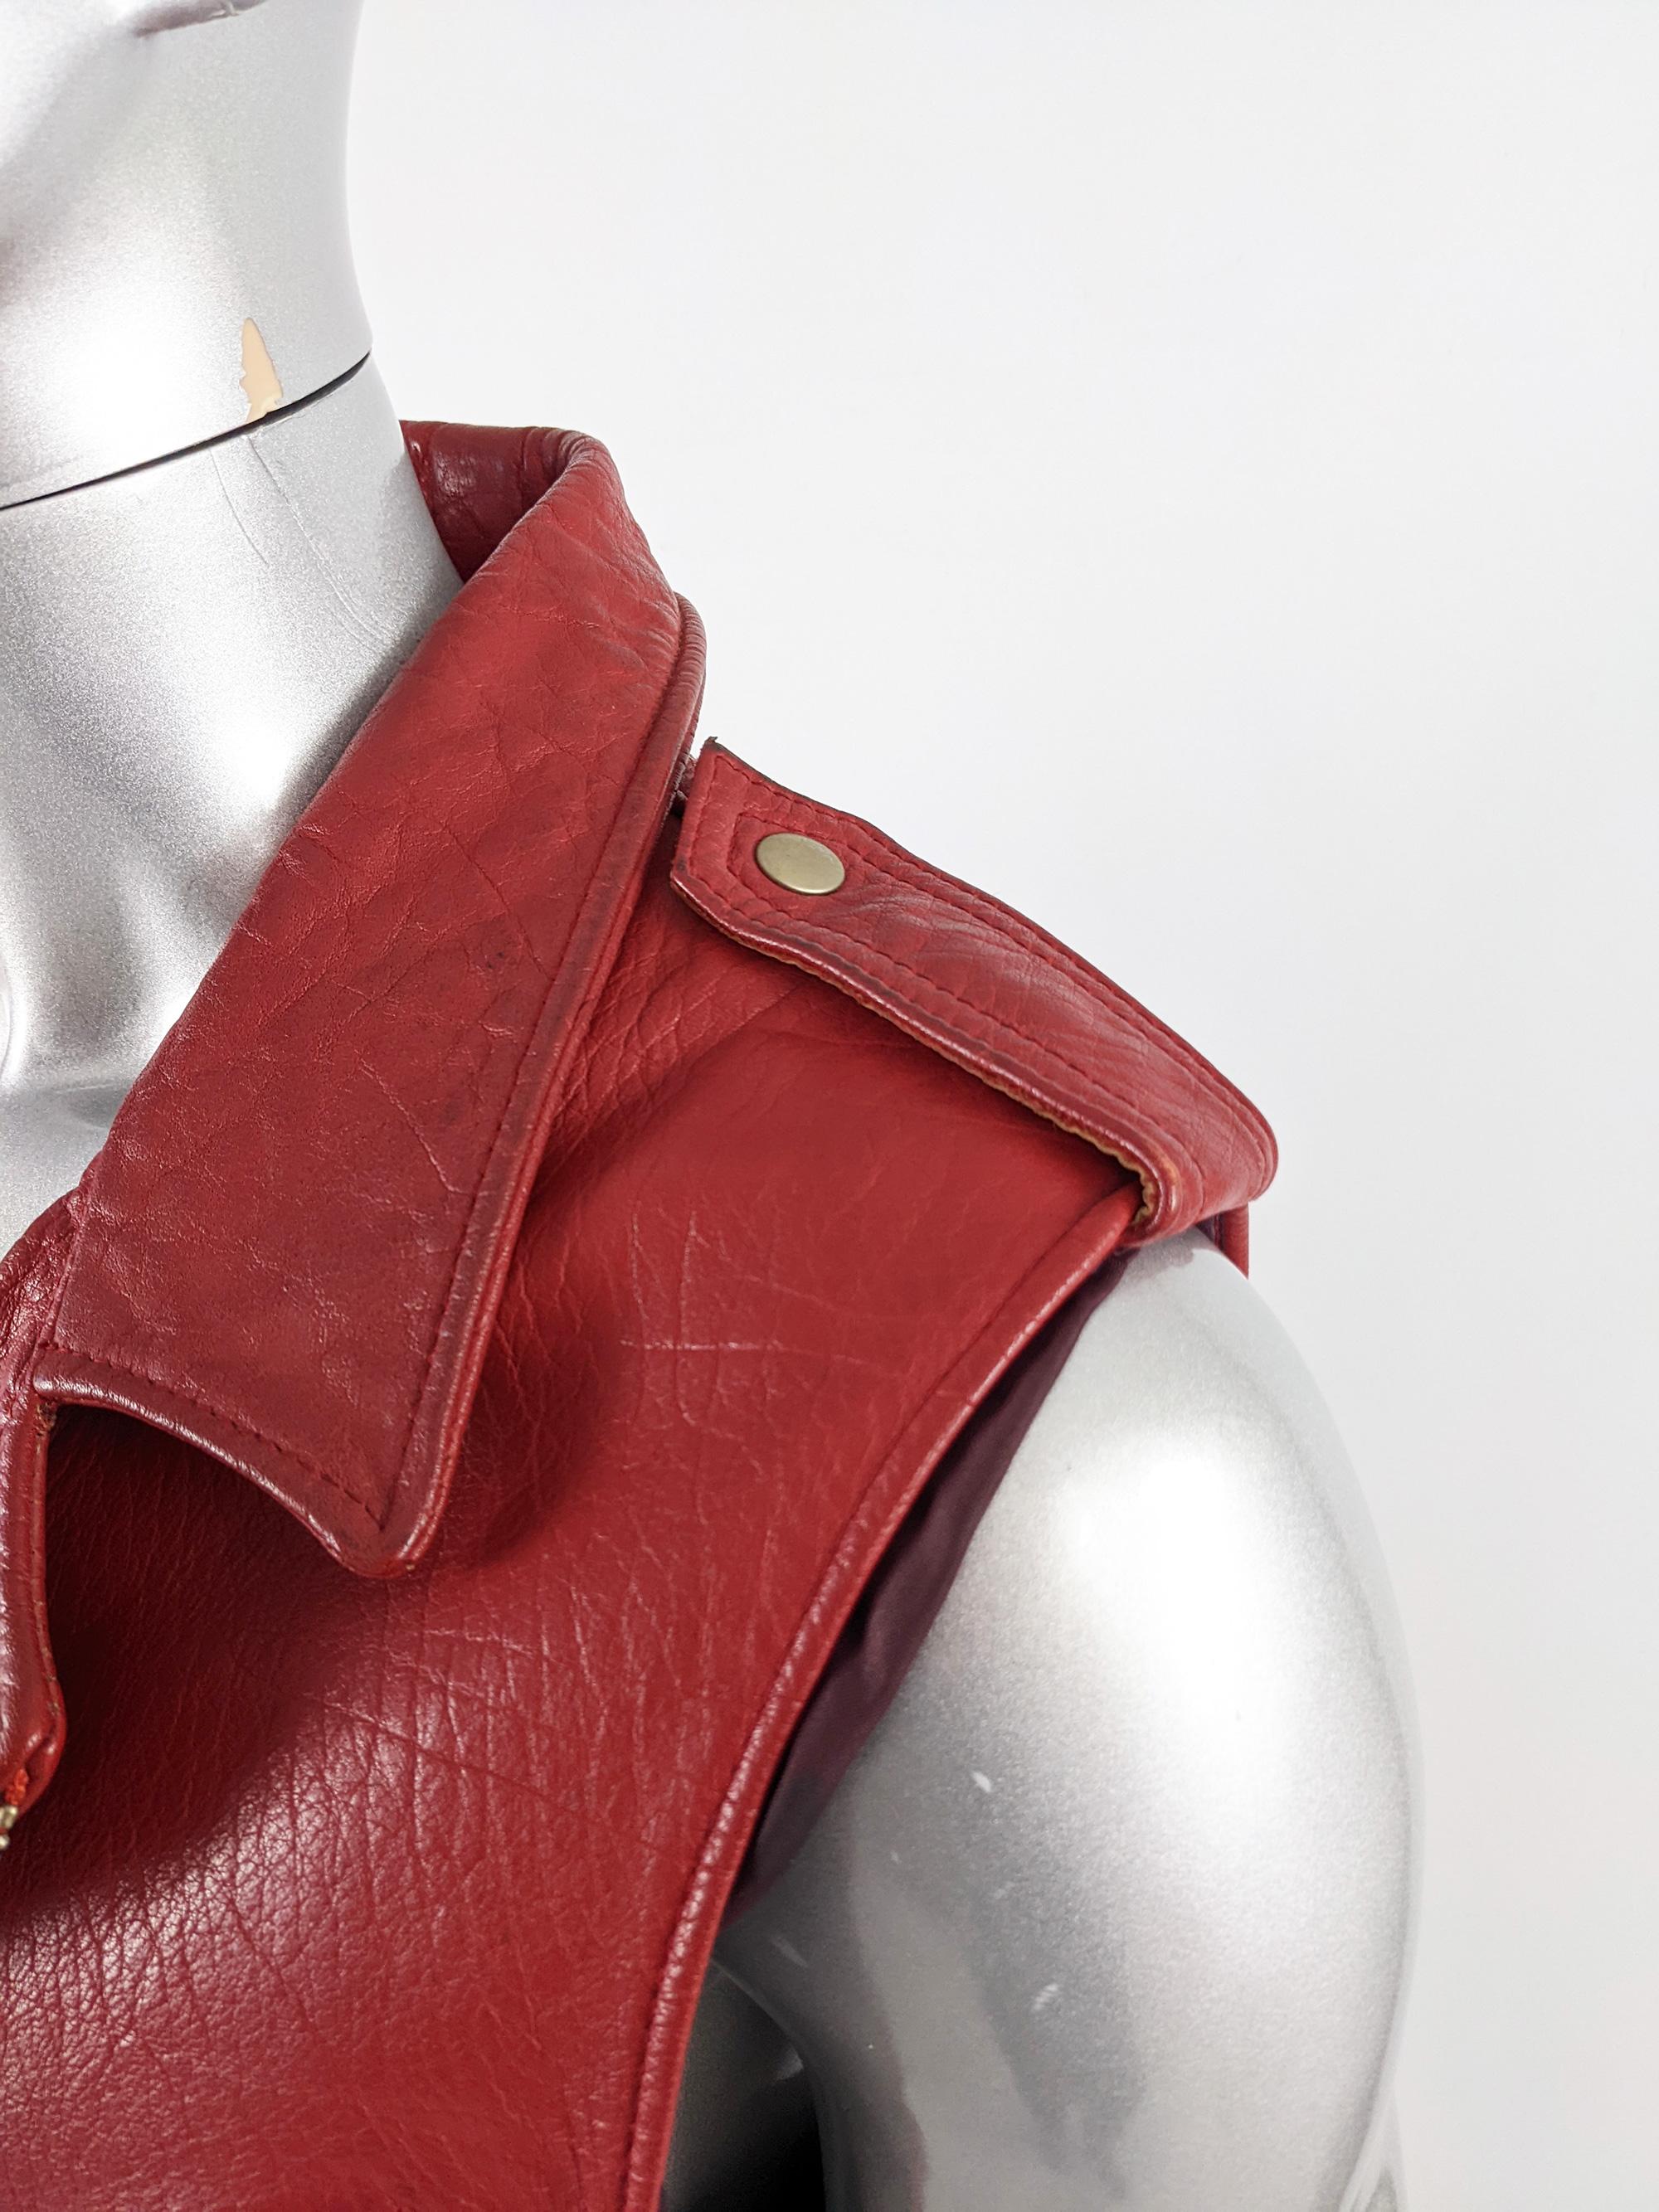 Chevignon Paris Vintage Mens Red Leather Sleeveless Jacket Biker Vest, 1980s In Good Condition For Sale In Doncaster, South Yorkshire